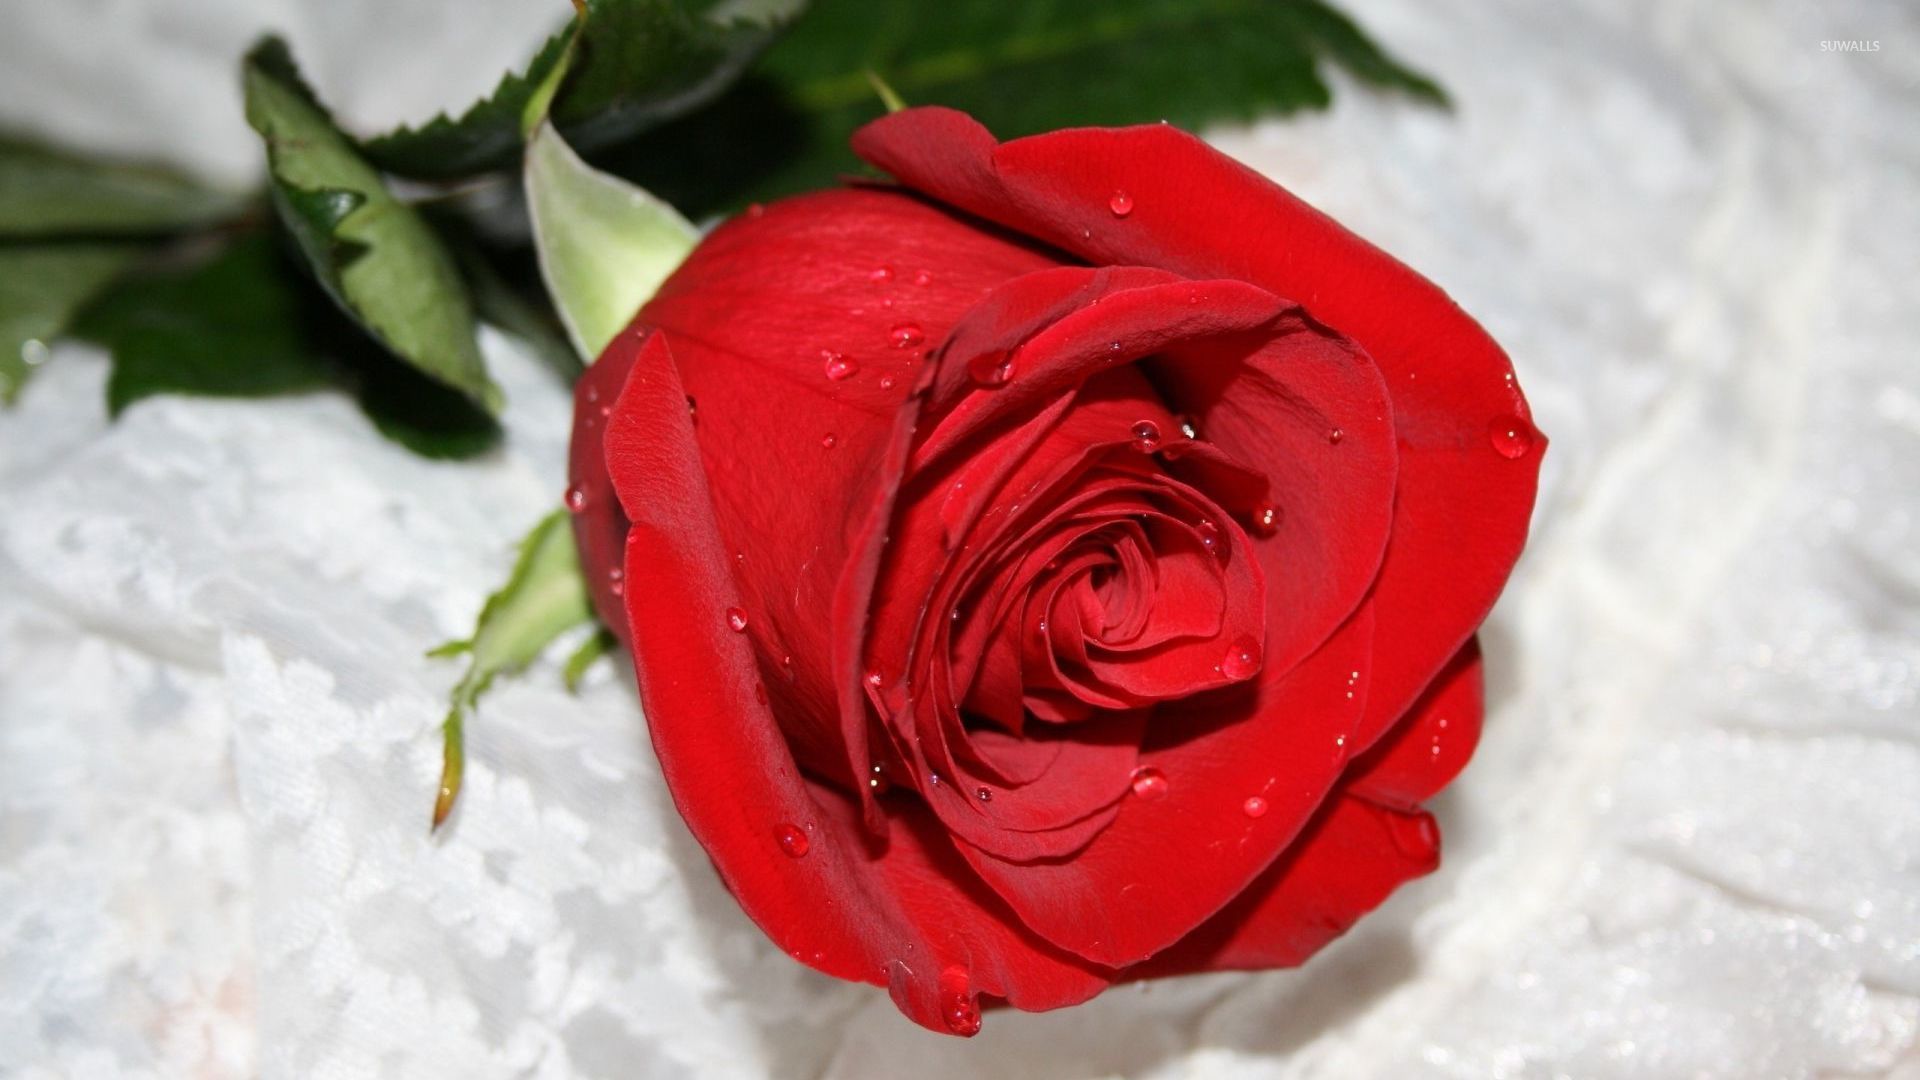 Red rose with water drops wallpaper   Flower wallpapers   34452